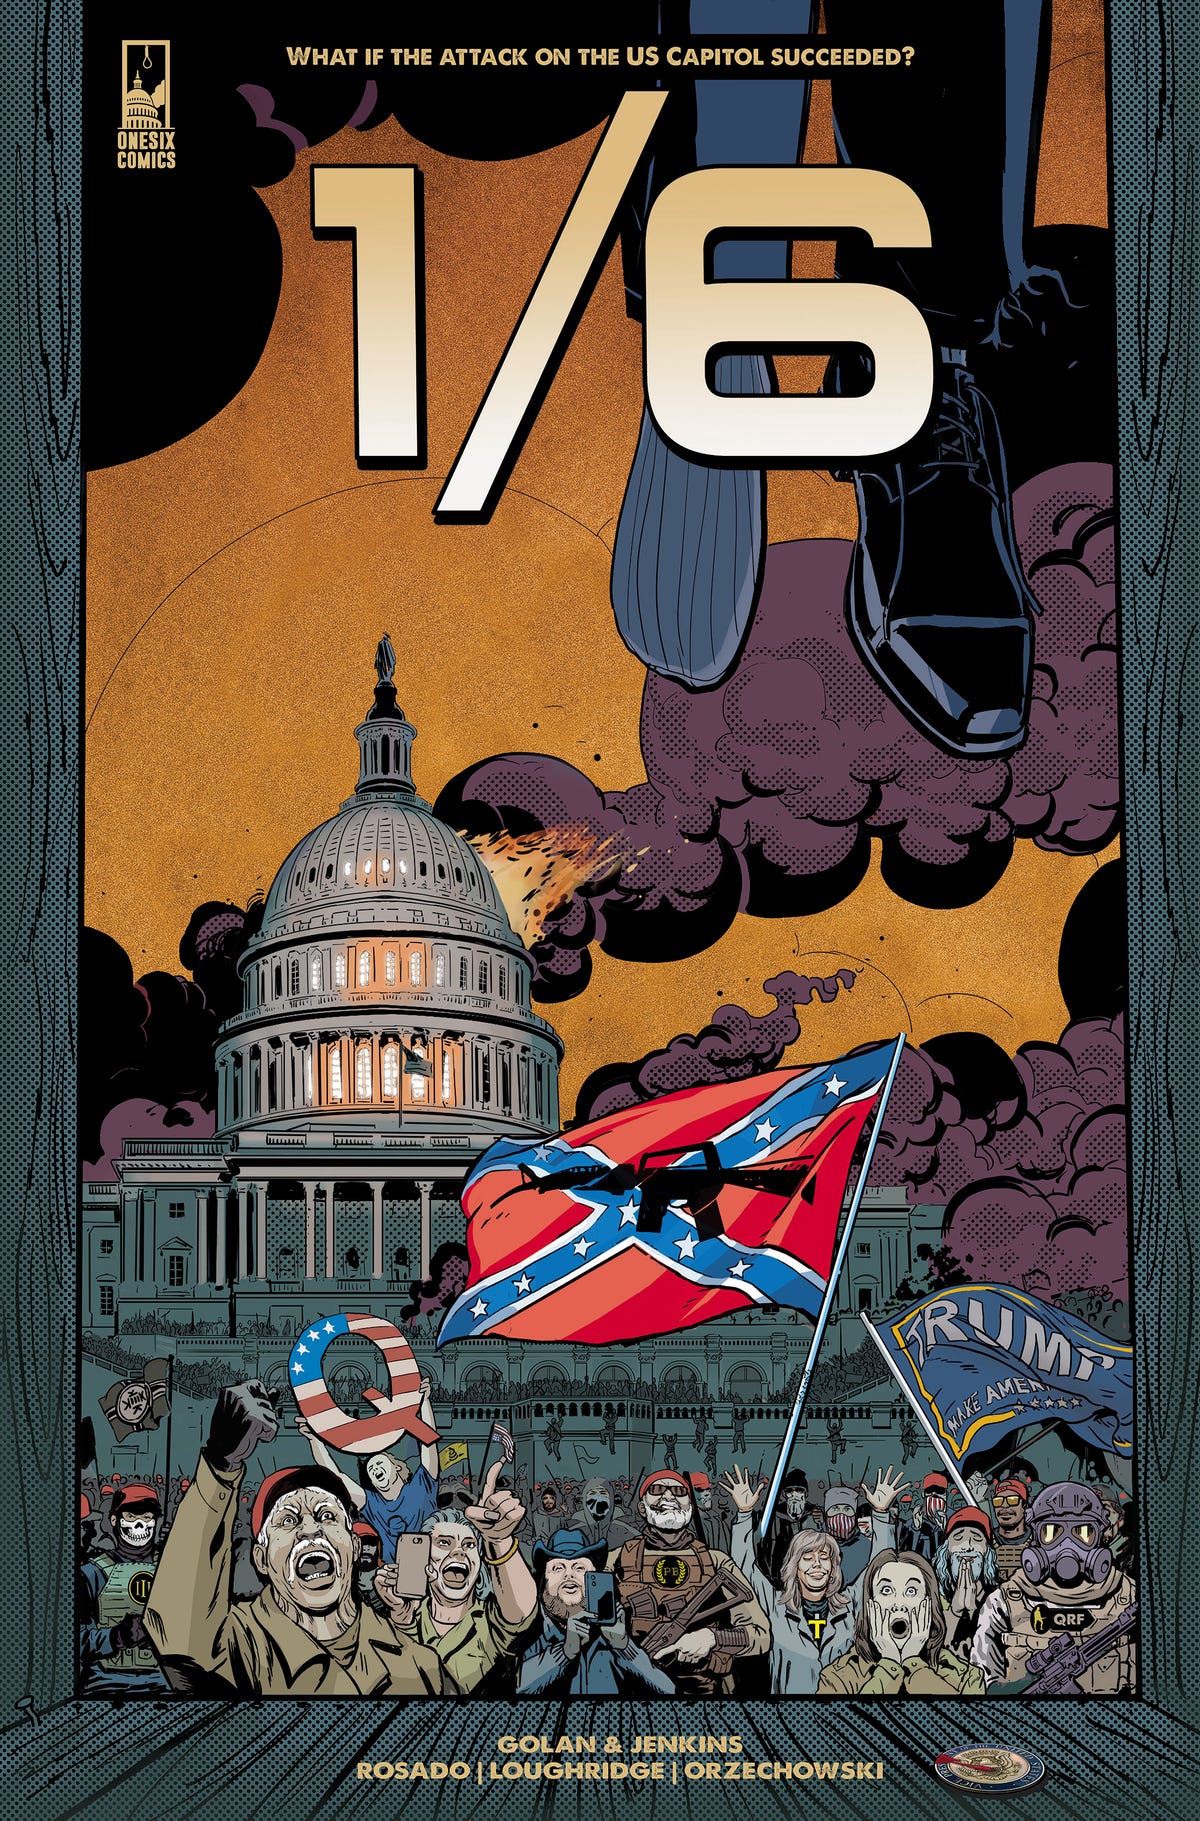 Graphic novel cover 1/6 shows rioters at the United States Capitol waving a Confederate flag